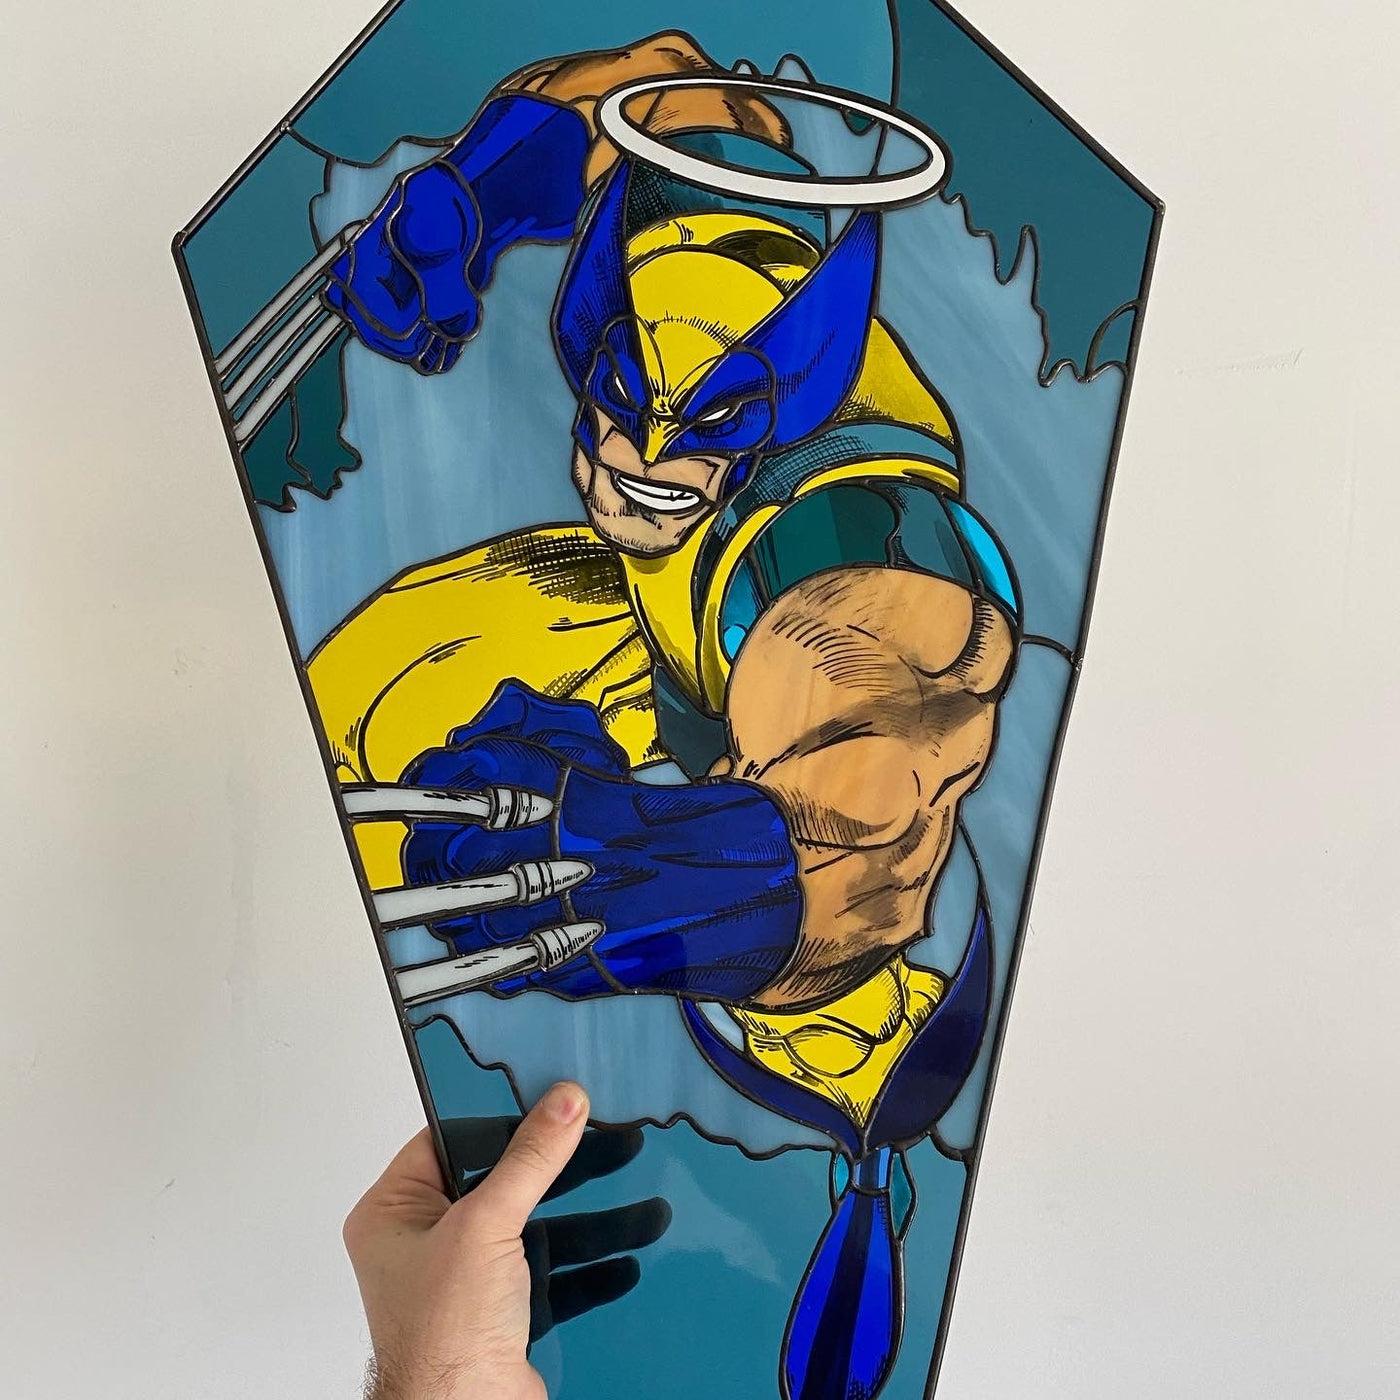 Heroes Never Die - Wolverine Inspired Stained Glass Art